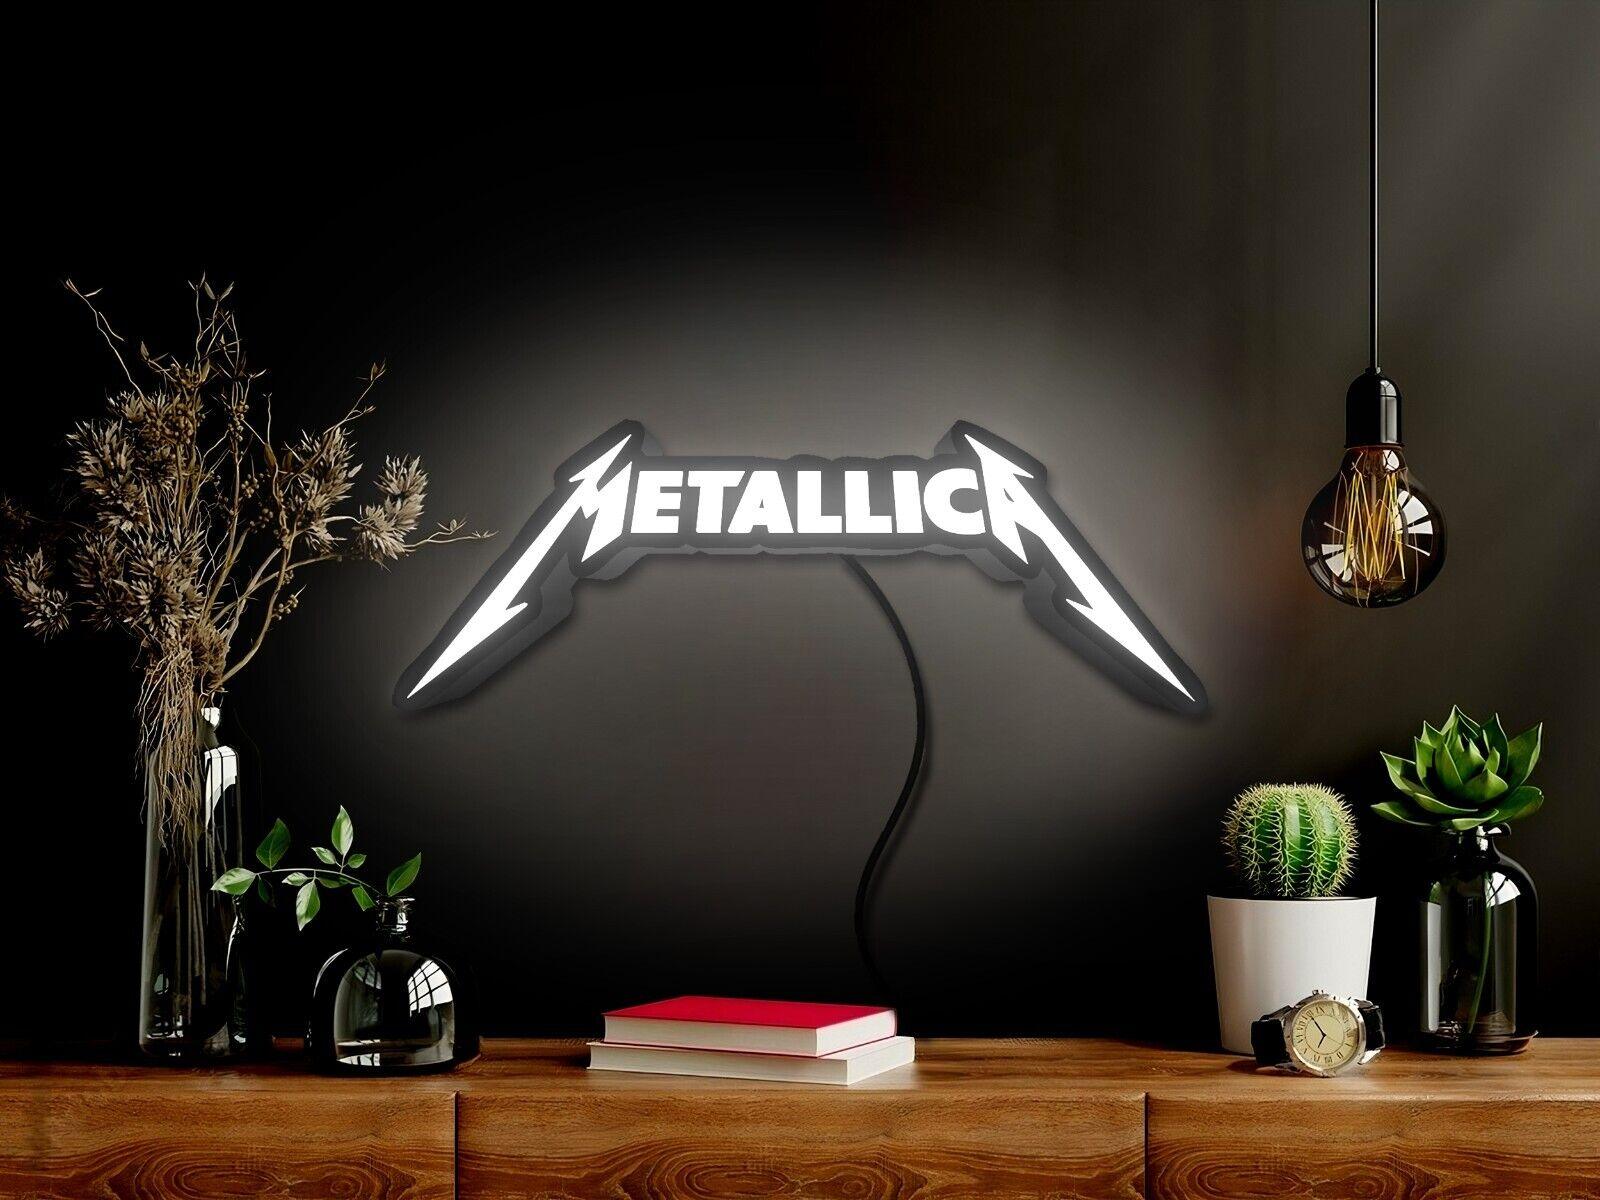 Metallica 3D Printed LED Lamp Illuminate 3D Lightbox Your Space Dimmable & Powered by USB - FYLZGO Signs